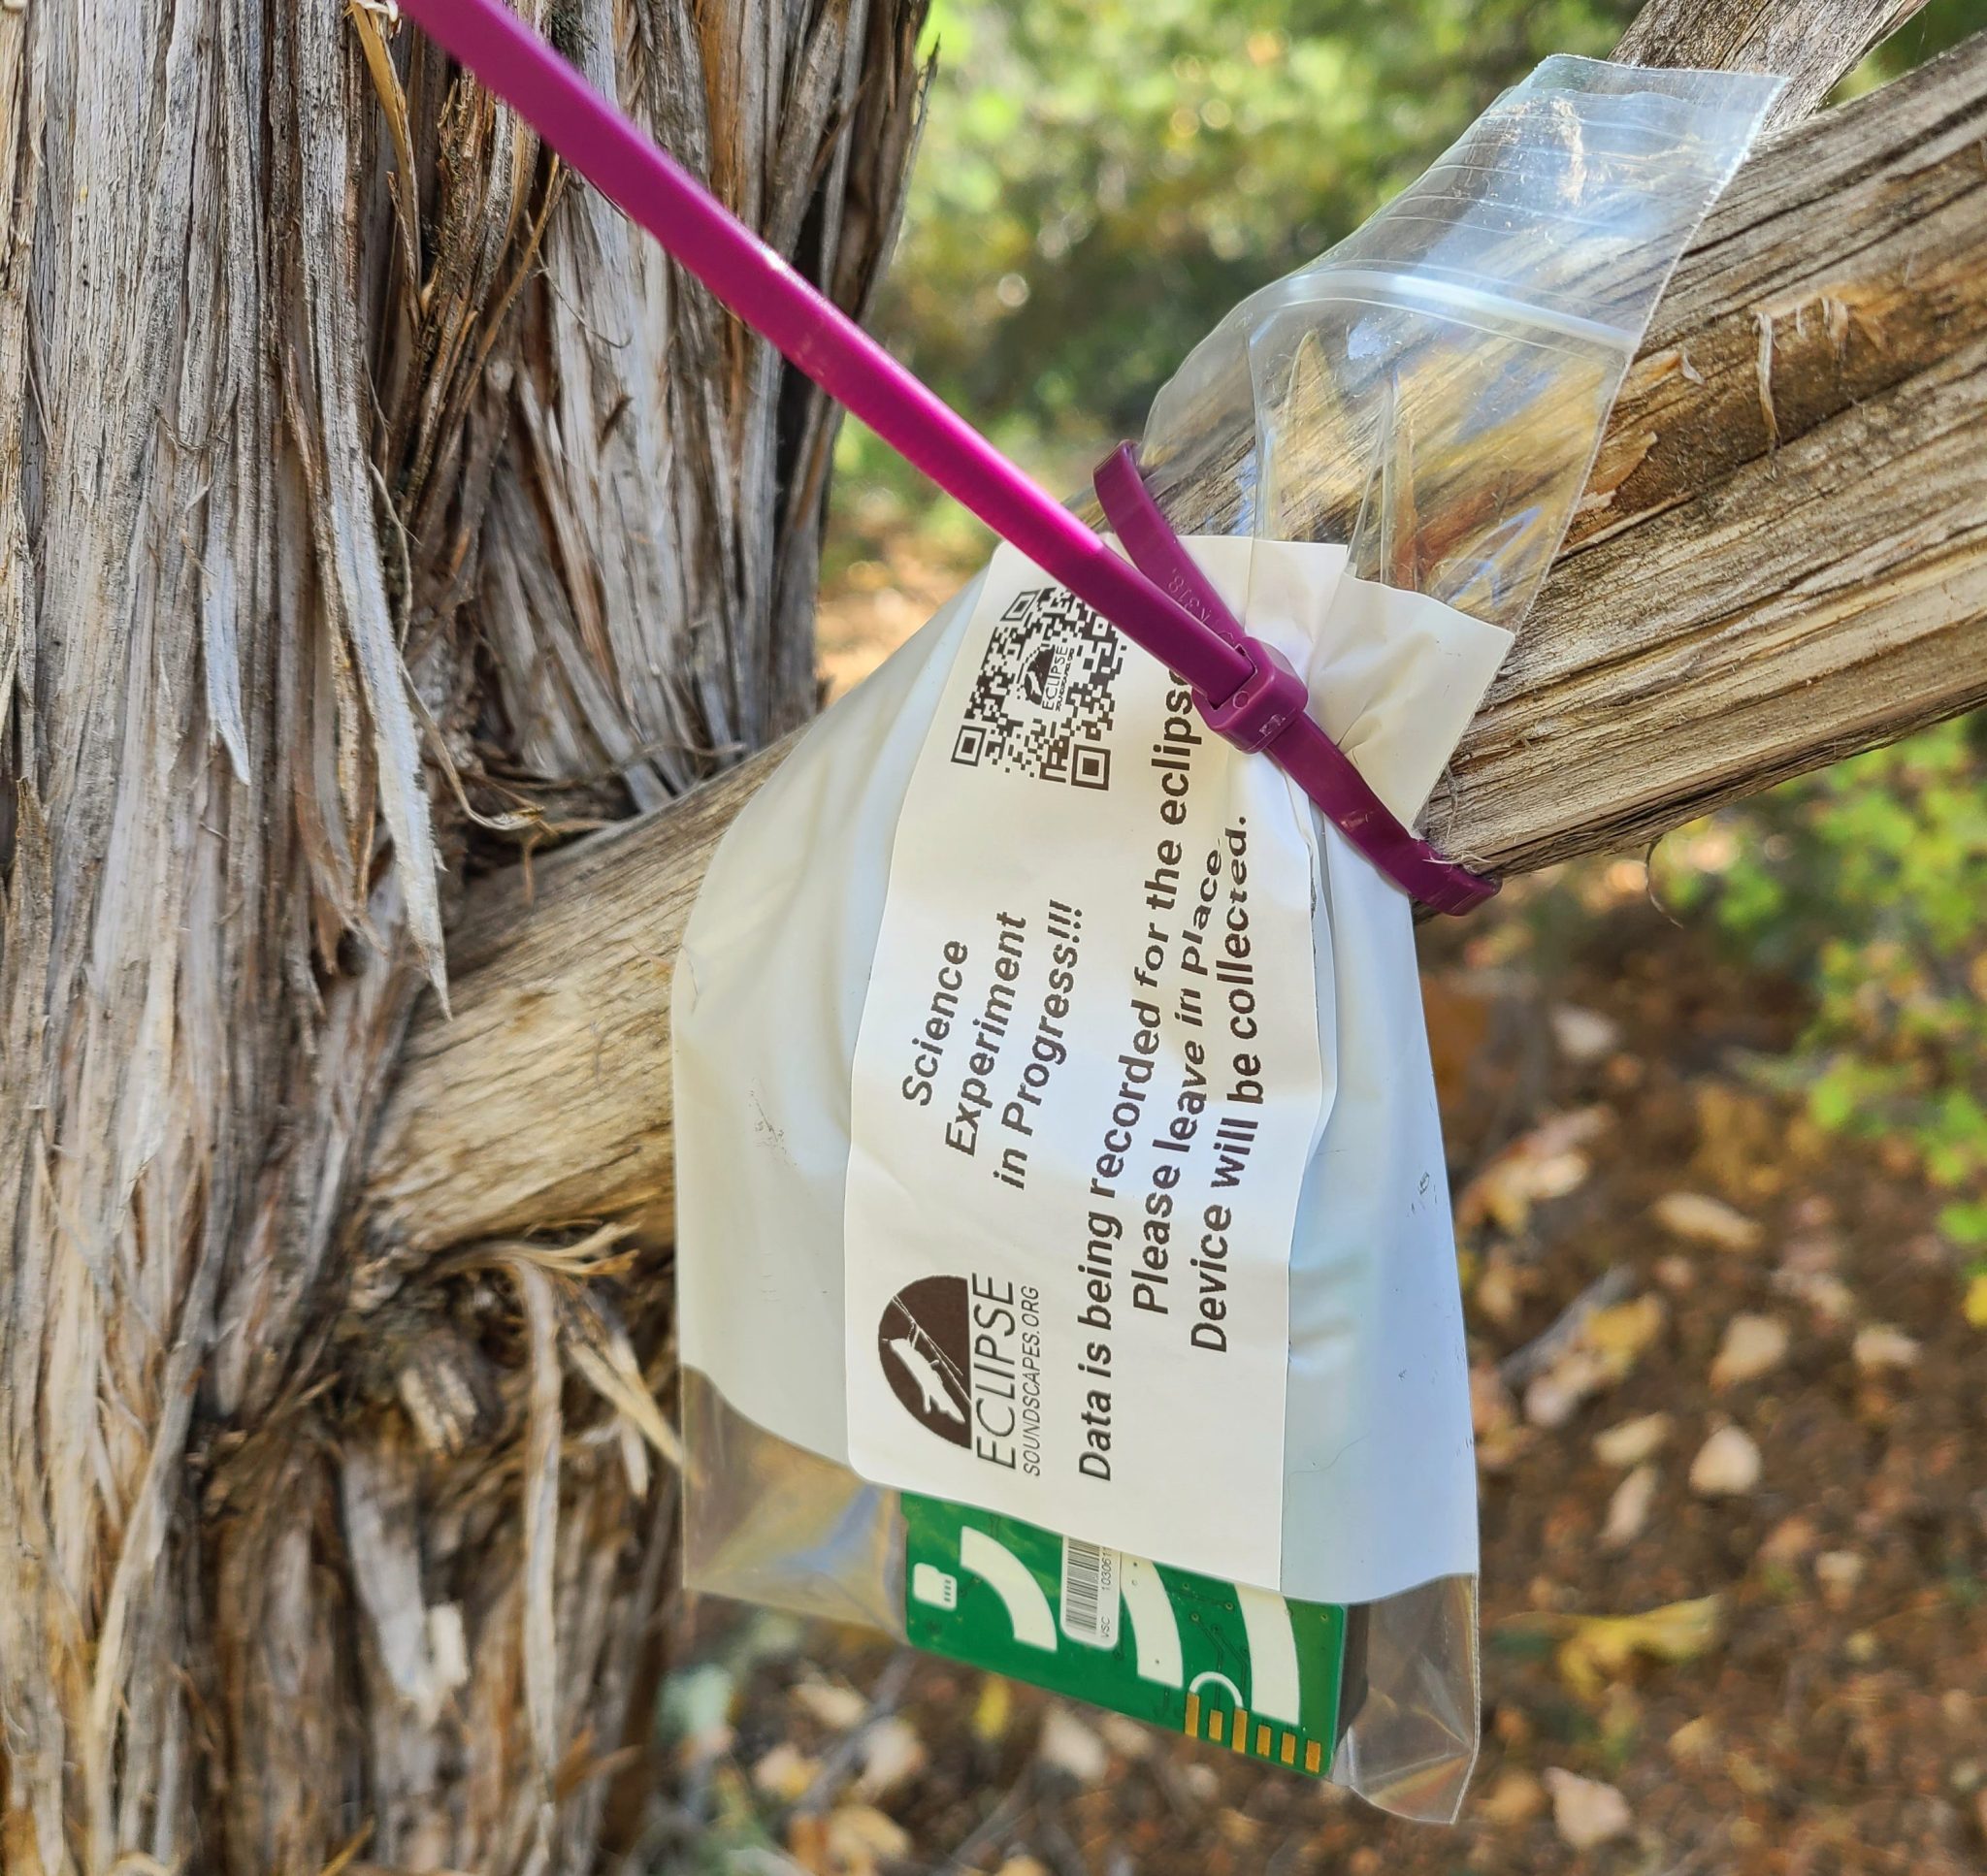 A plastic bag with a green device that looks similar to a floppy disk is attached to a tree branch with a zip tie. There is a label on the bag that says Science Experiment in Progress and instructions not to move the device.